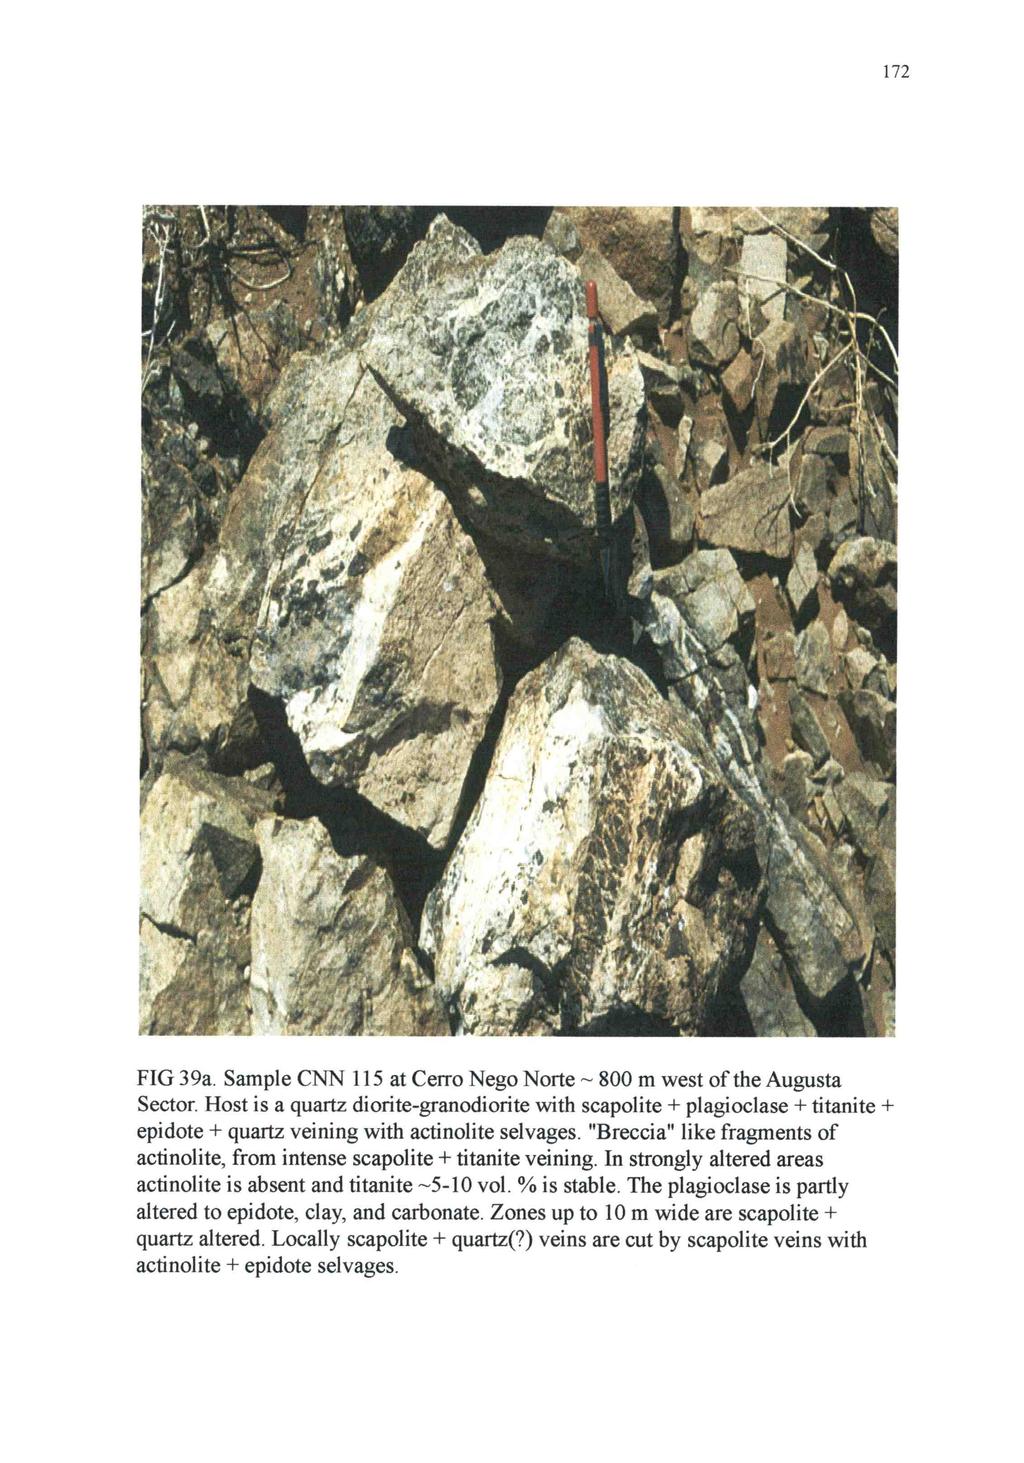 172 FIG 39a. Sample CNN 115 at Cerro Nego Norte 800 m west of the Augusta Sector.